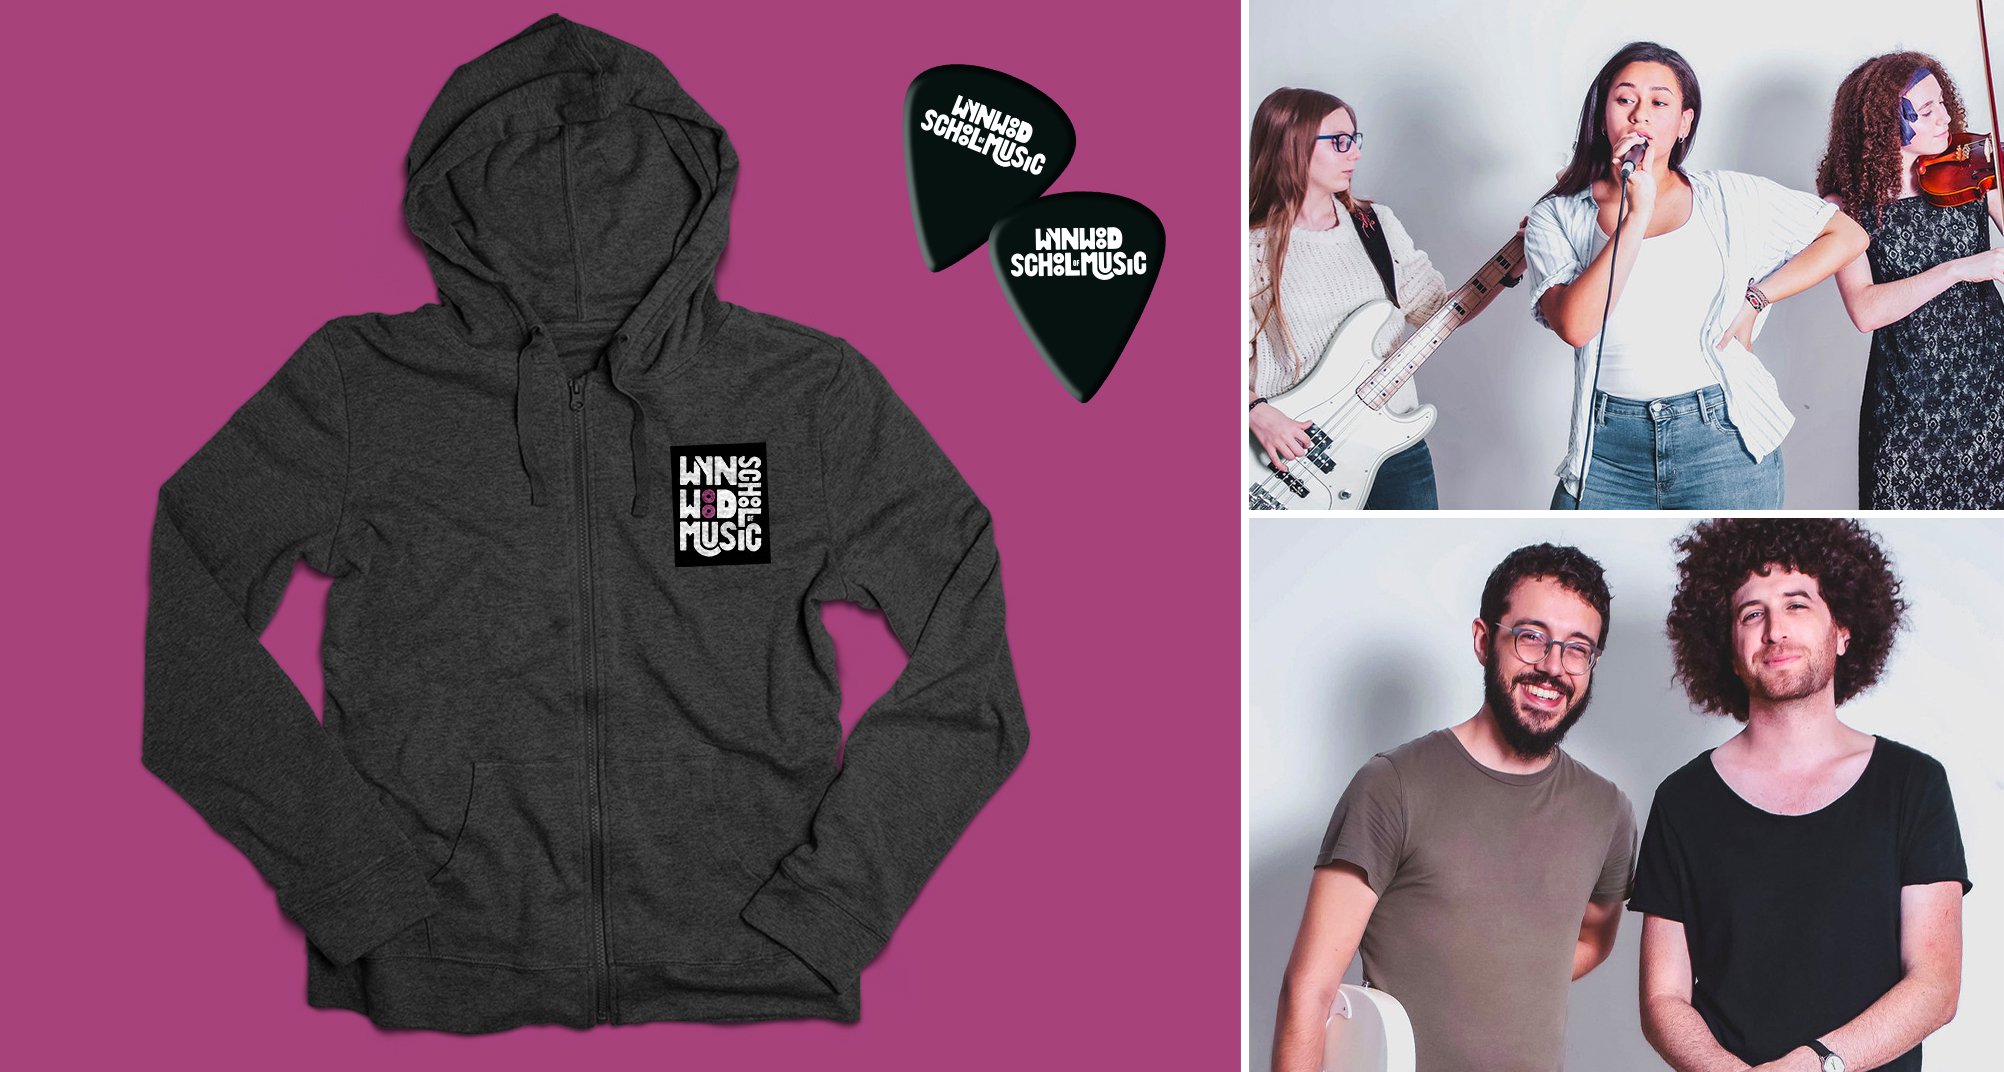 wynwood school of music apparel hoodie and guitar picks with photo grid of students and teachers